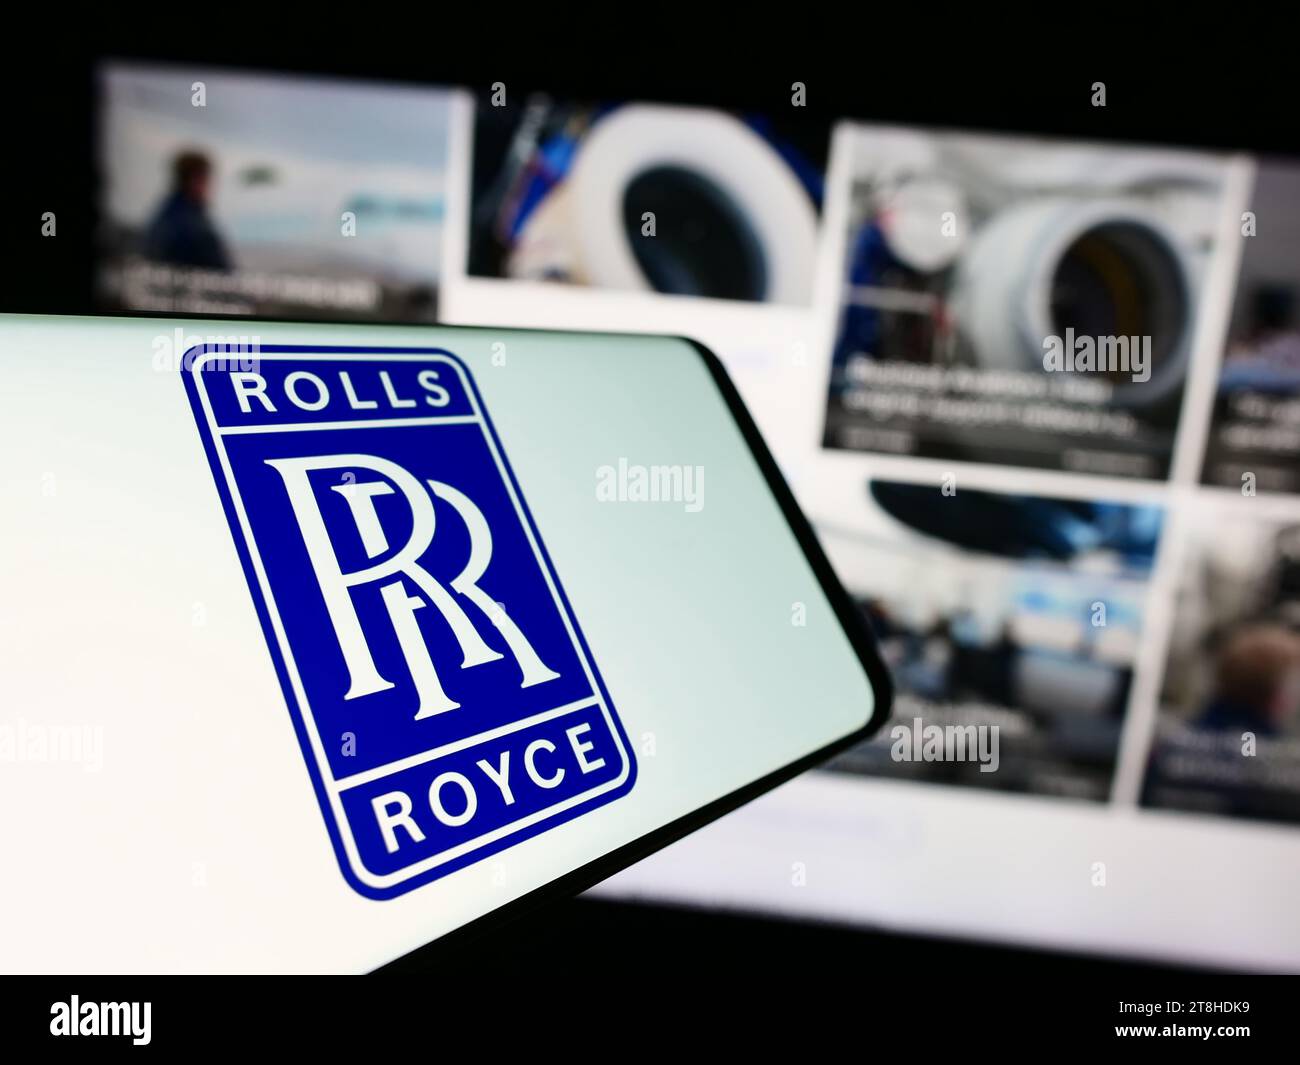 Smartphone with logo of British aerospace company Rolls-Royce Holdings plc in front of business website. Focus on center-left of phone display. Stock Photo